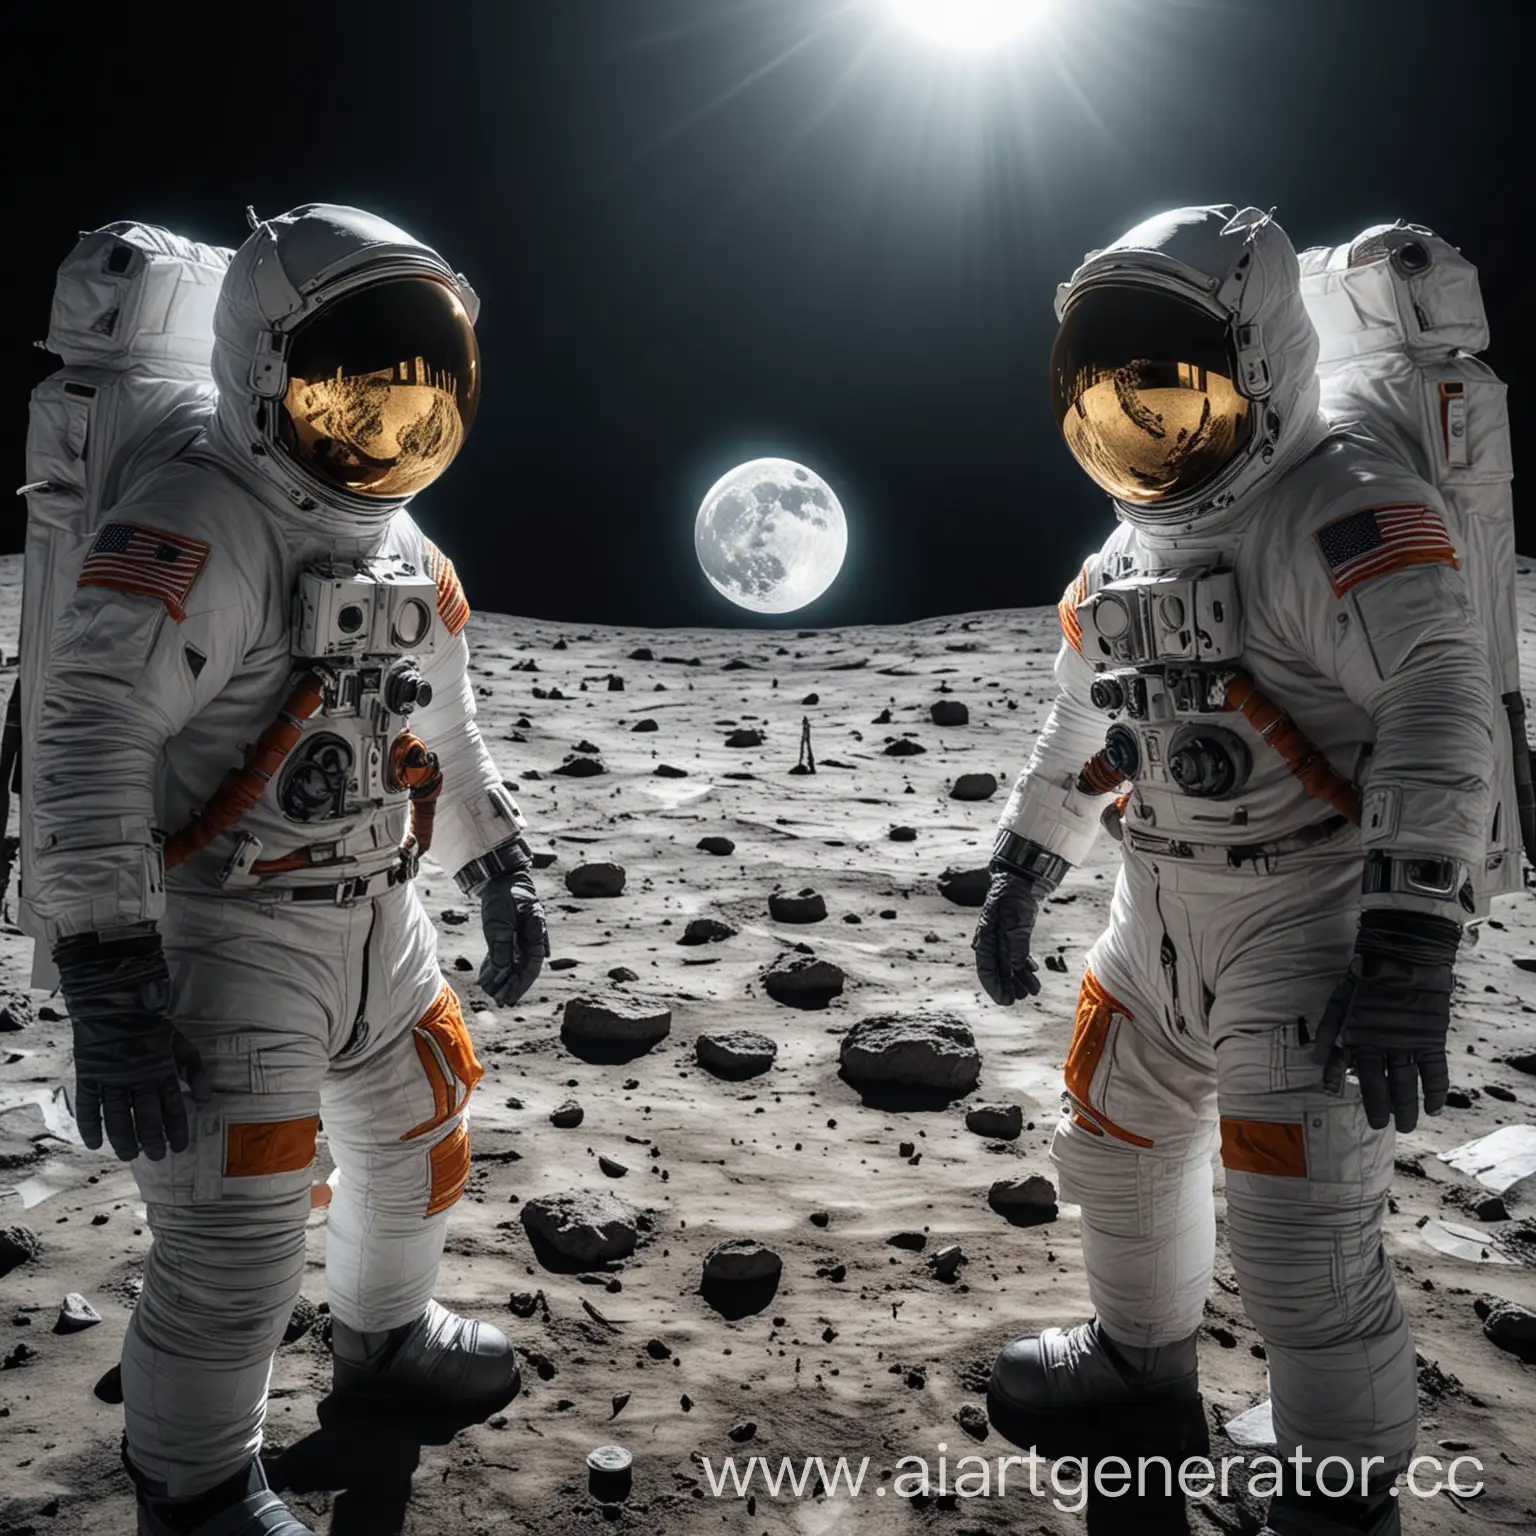 Dual-Astronauts-Reflecting-Moon-Suit-and-Bitcoin-Cryptocurrency-in-4K